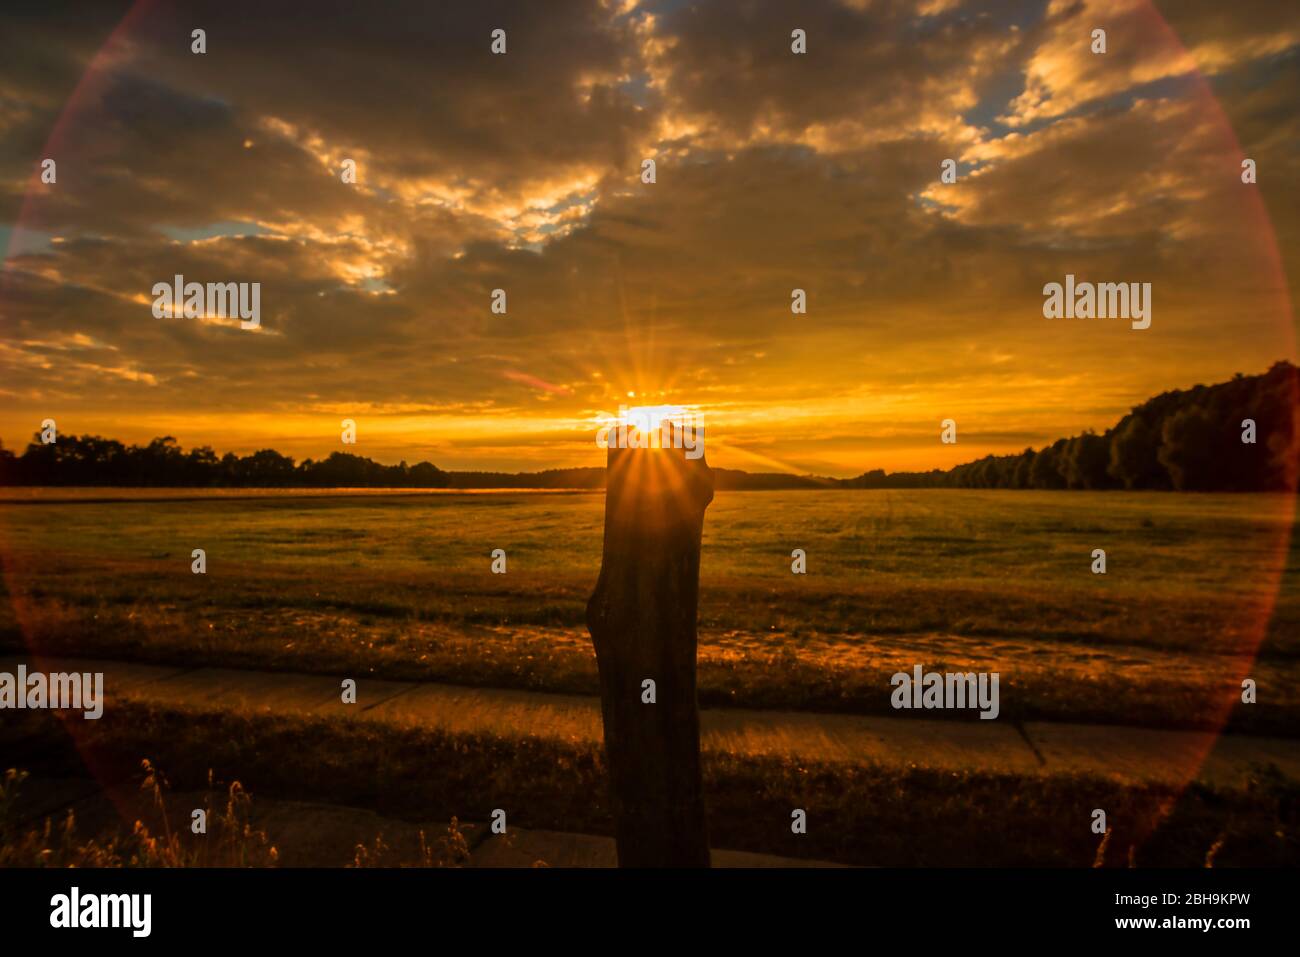 Sunset over agricultural land Stock Photo